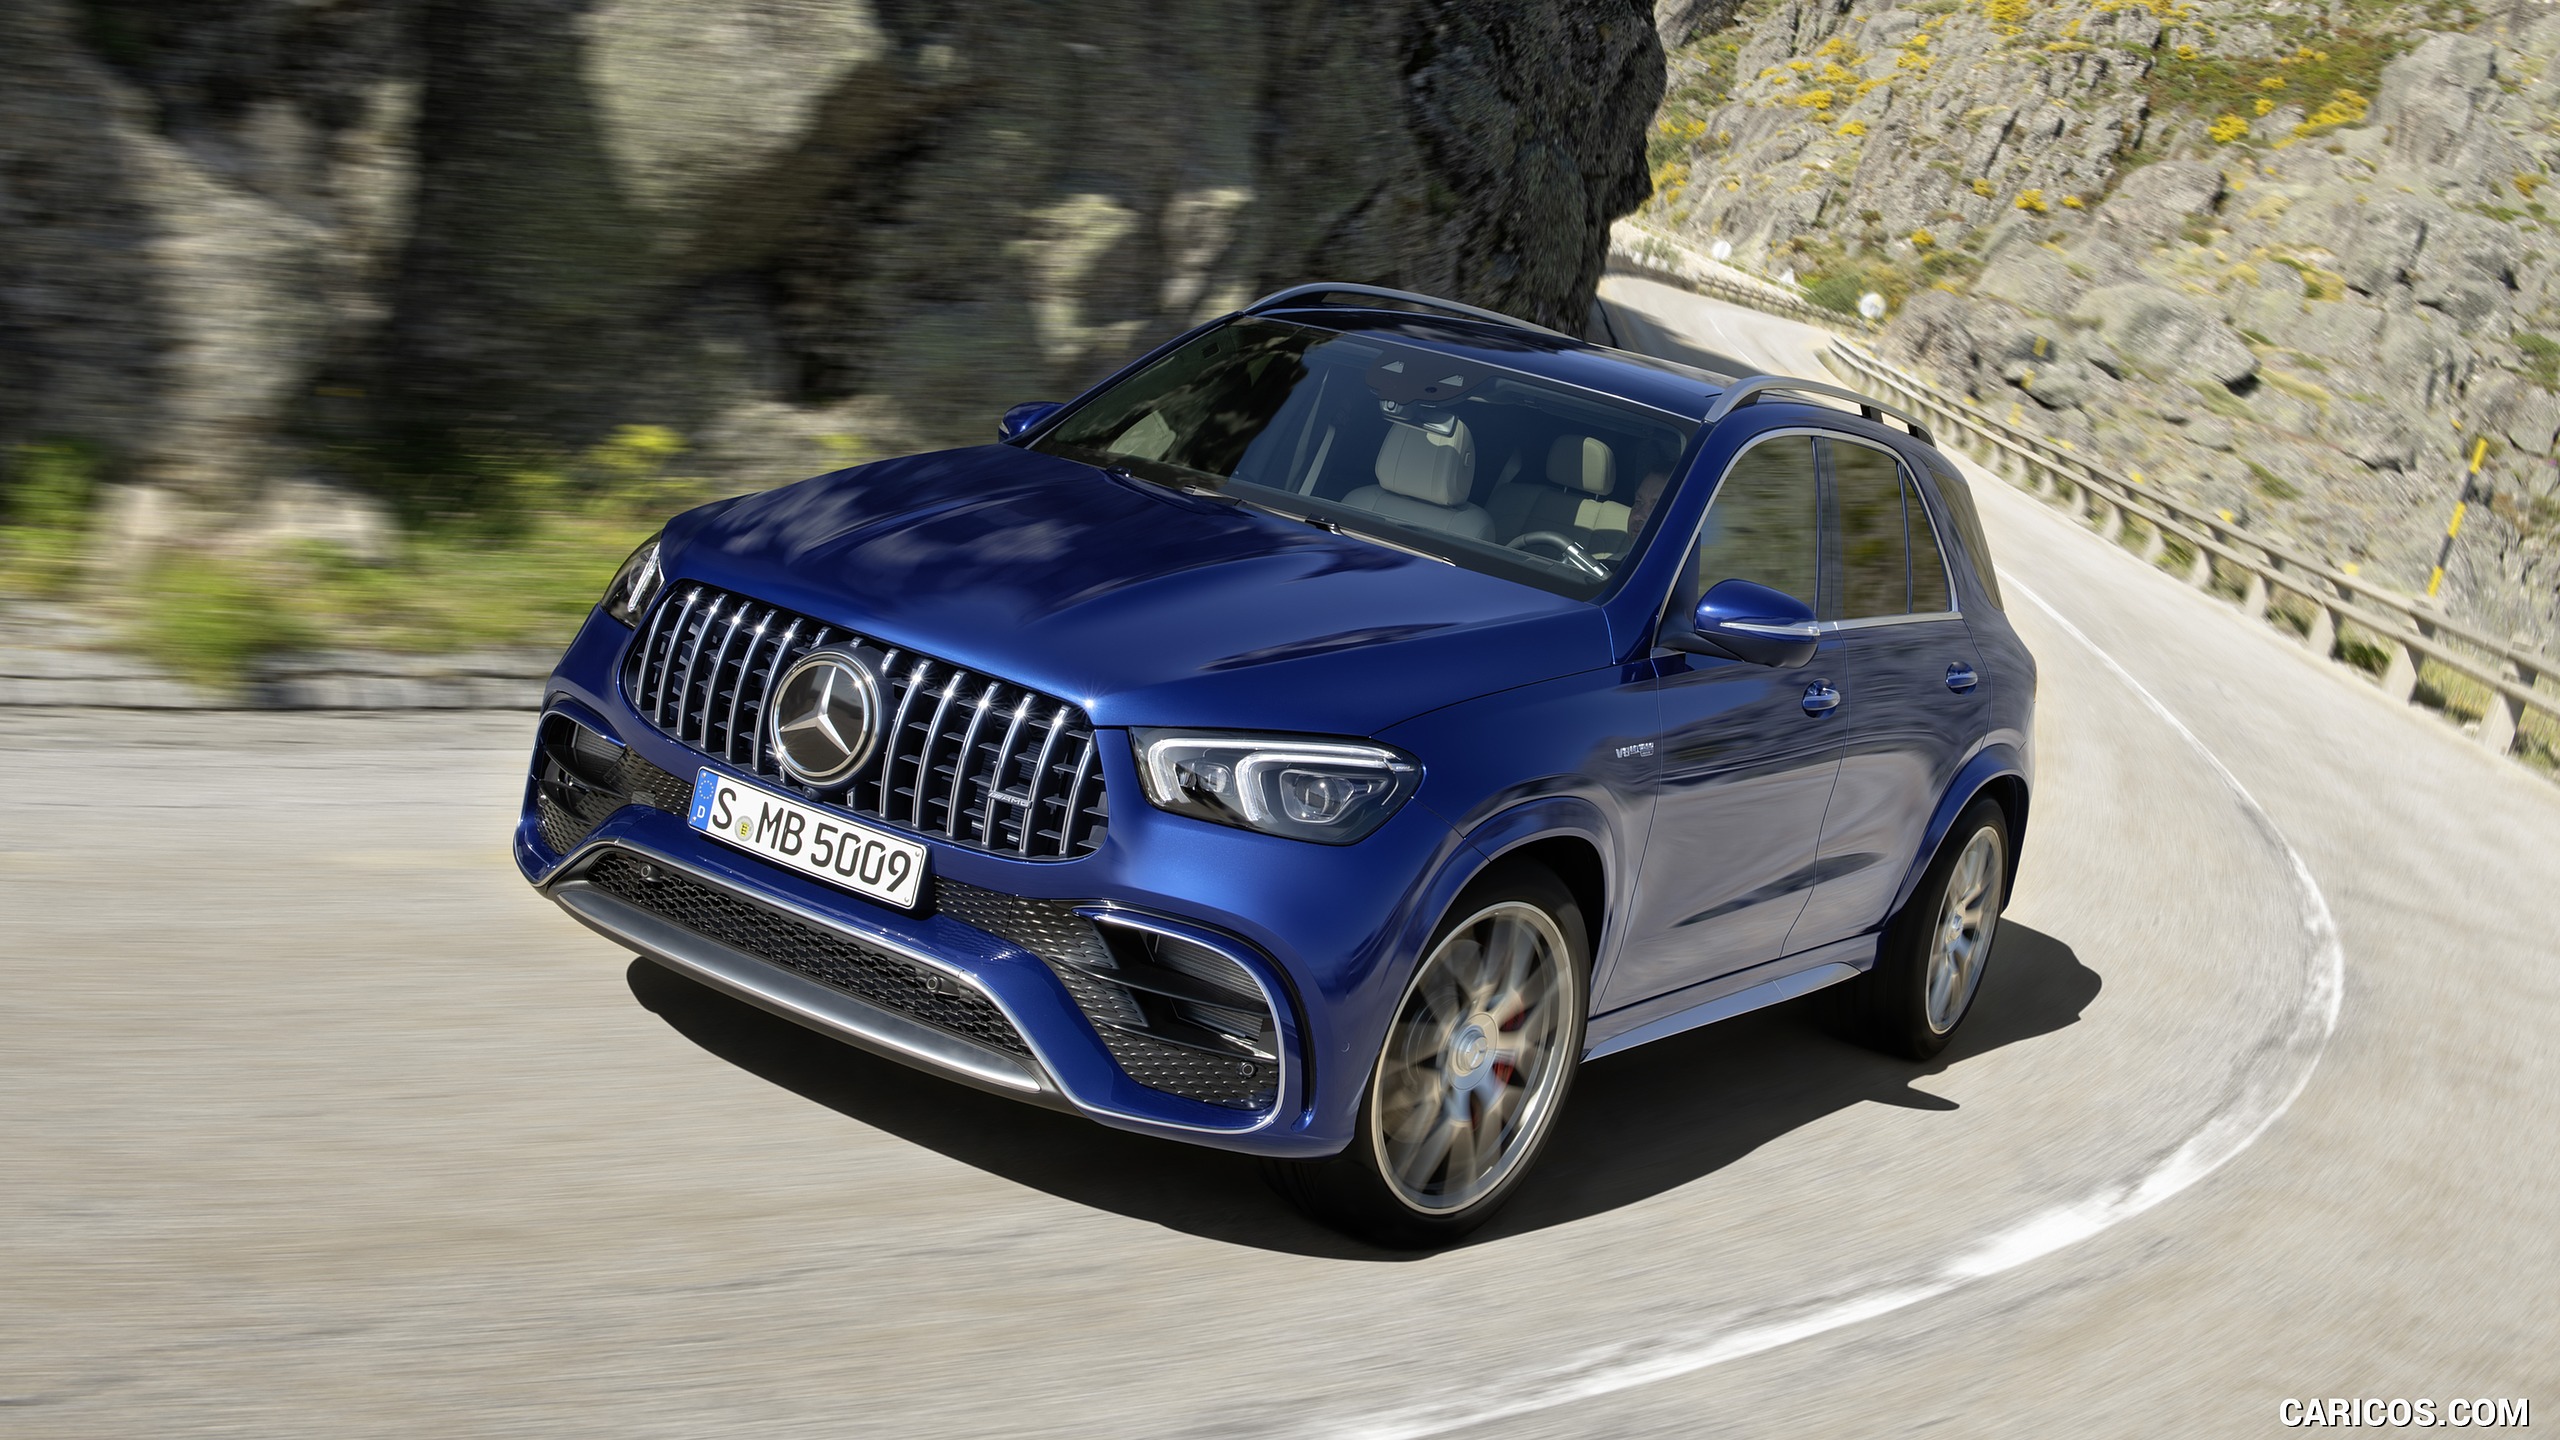 2021 Mercedes-AMG GLE 63 S 4MATIC - Front Three-Quarter, #5 of 187